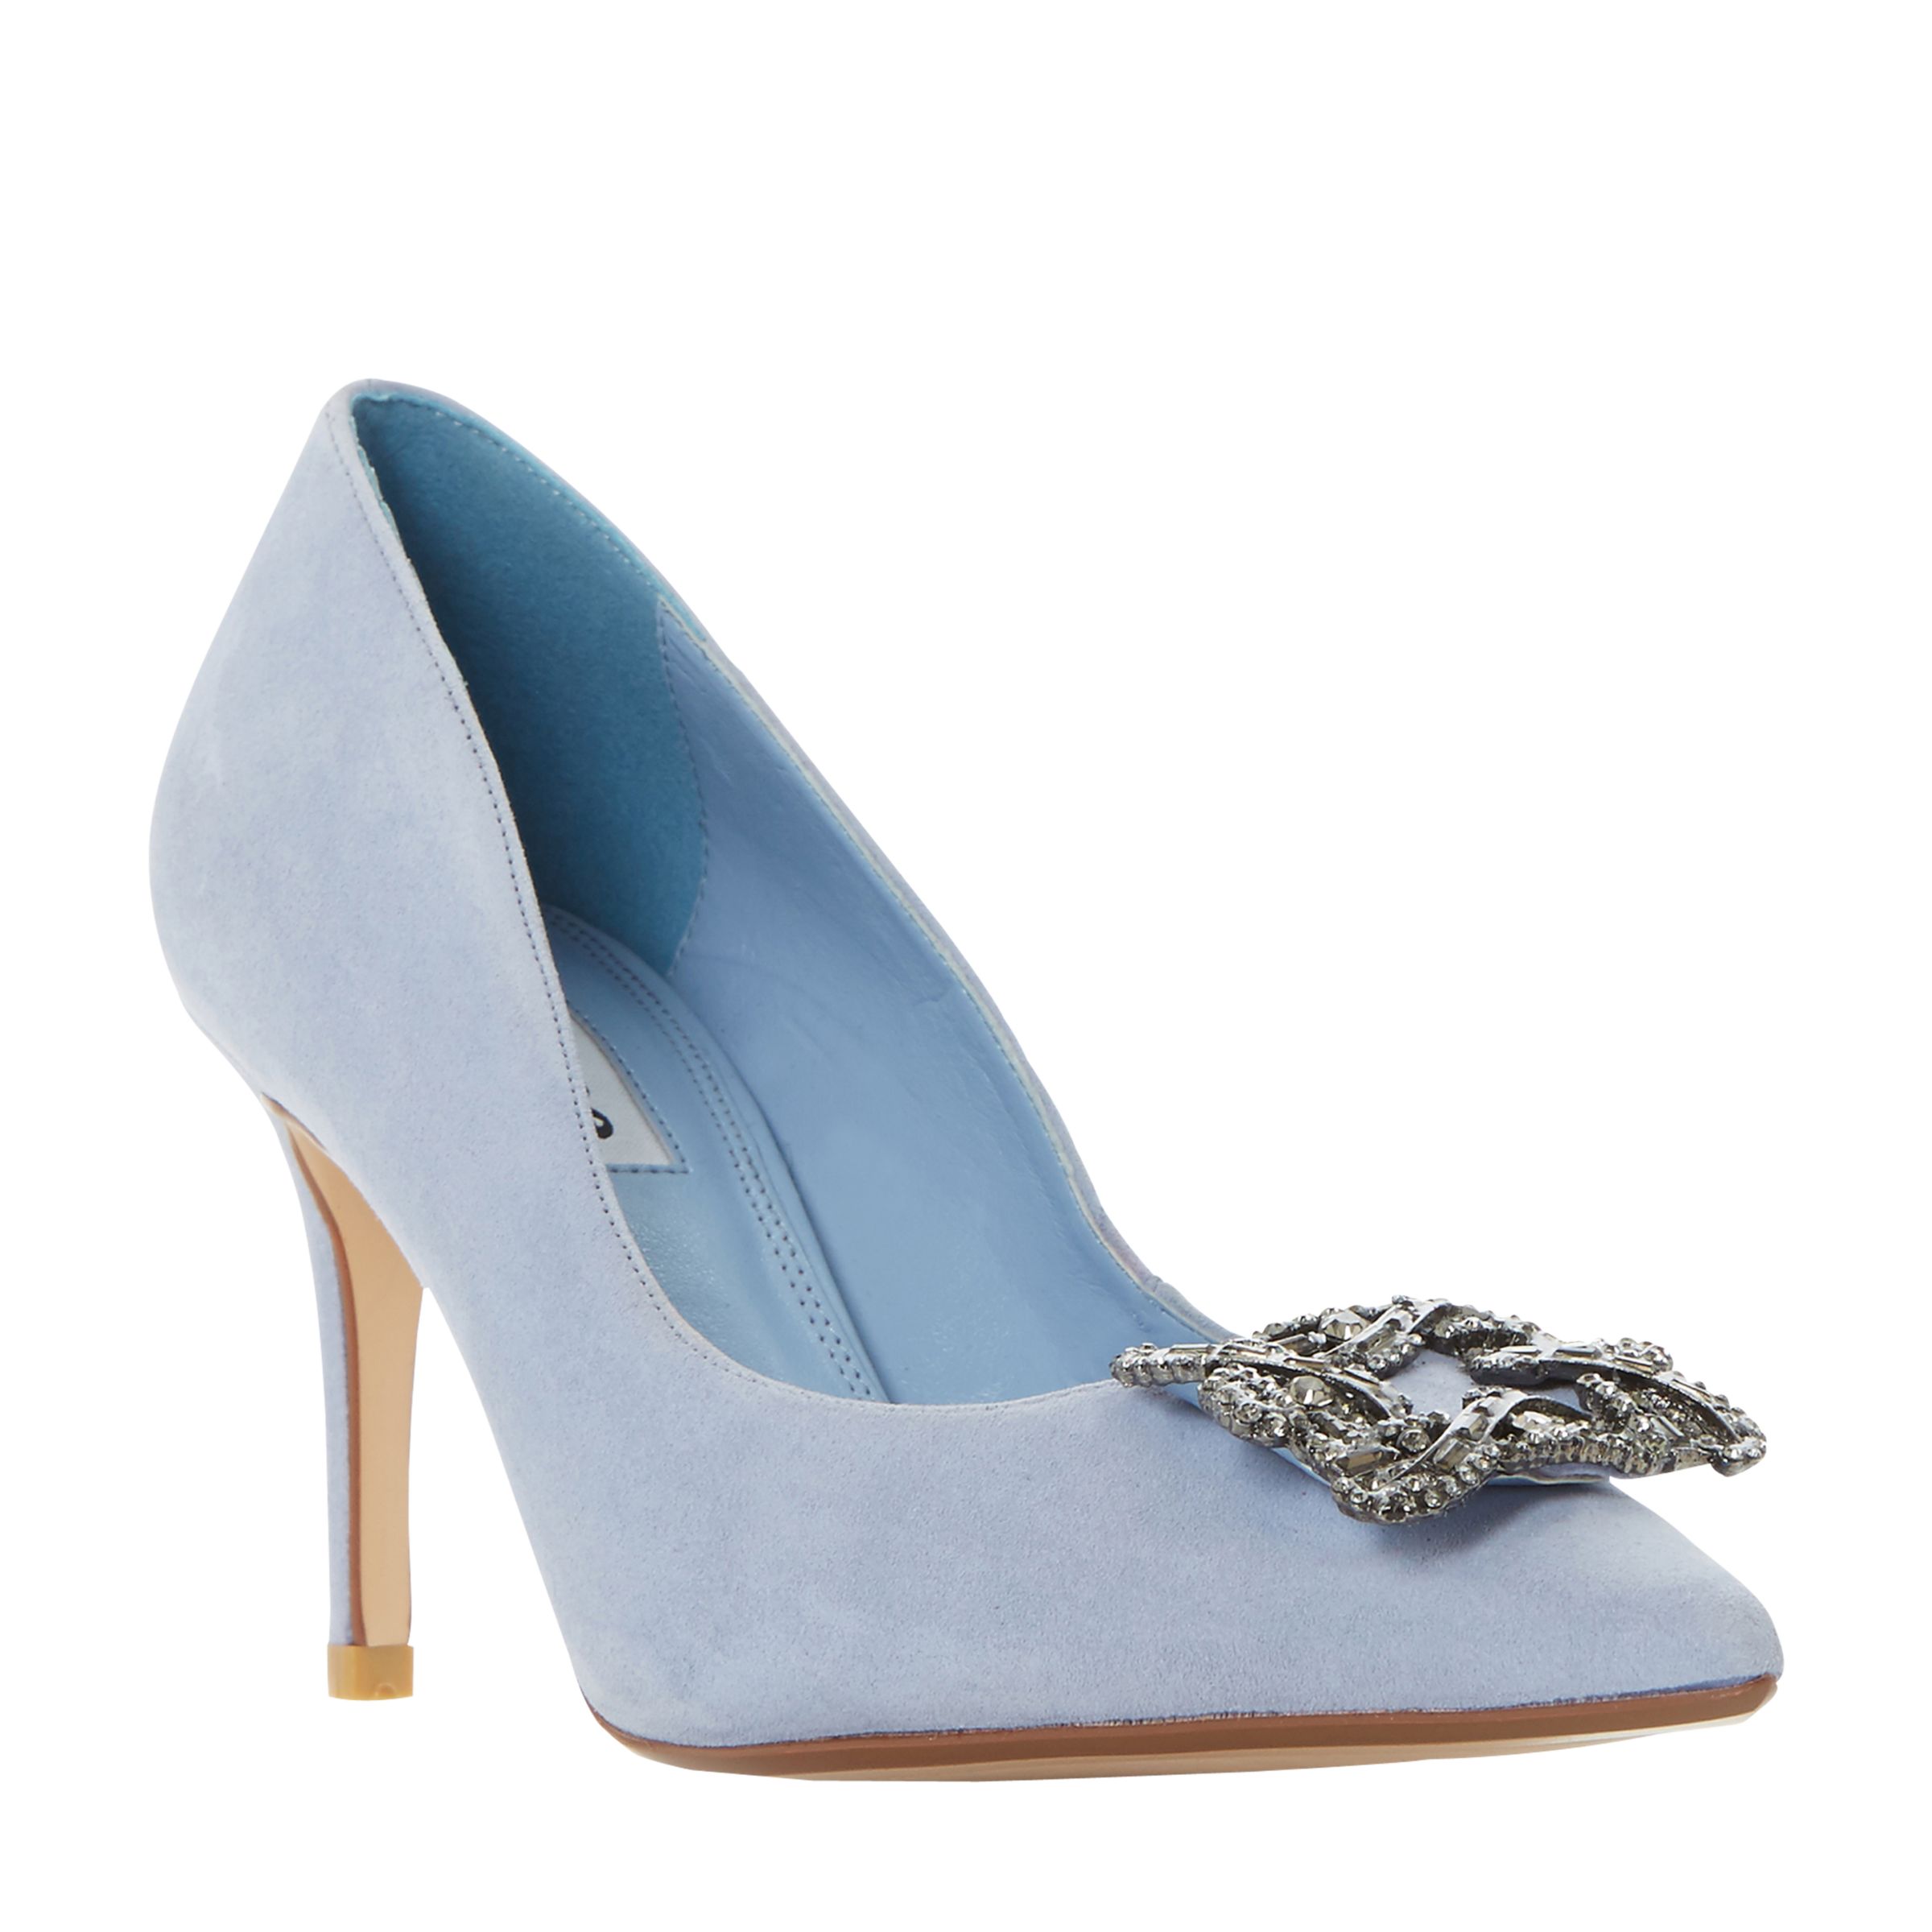 Dune Betti Embellished Stiletto Heeled Court Shoes, Blue Suede, 7